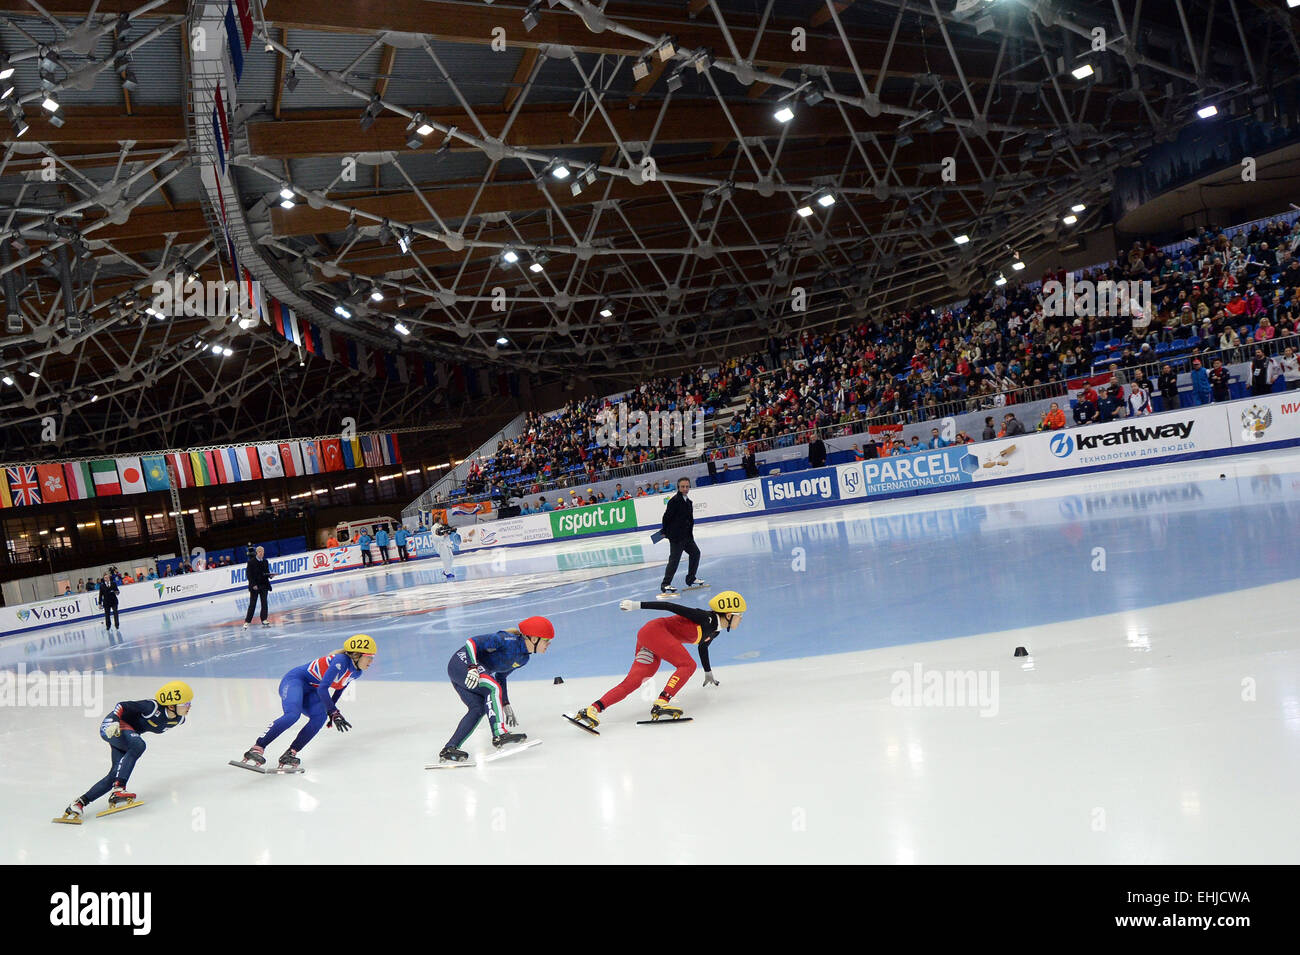 Moscow, Elise Christie of Great Britain. 14th Mar, 2015. Minjeong Choi of Korea, Elise Christie of Great Britain, Arianna Fontana of Italy and Fan Kexin of China (L-R) skate during ladies' 500m final at ISU World Short Track Speed Skating Championships in Moscow Mar. 14, 2015. Credit:  Pavel Bednyakov/Xinhua/Alamy Live News Stock Photo